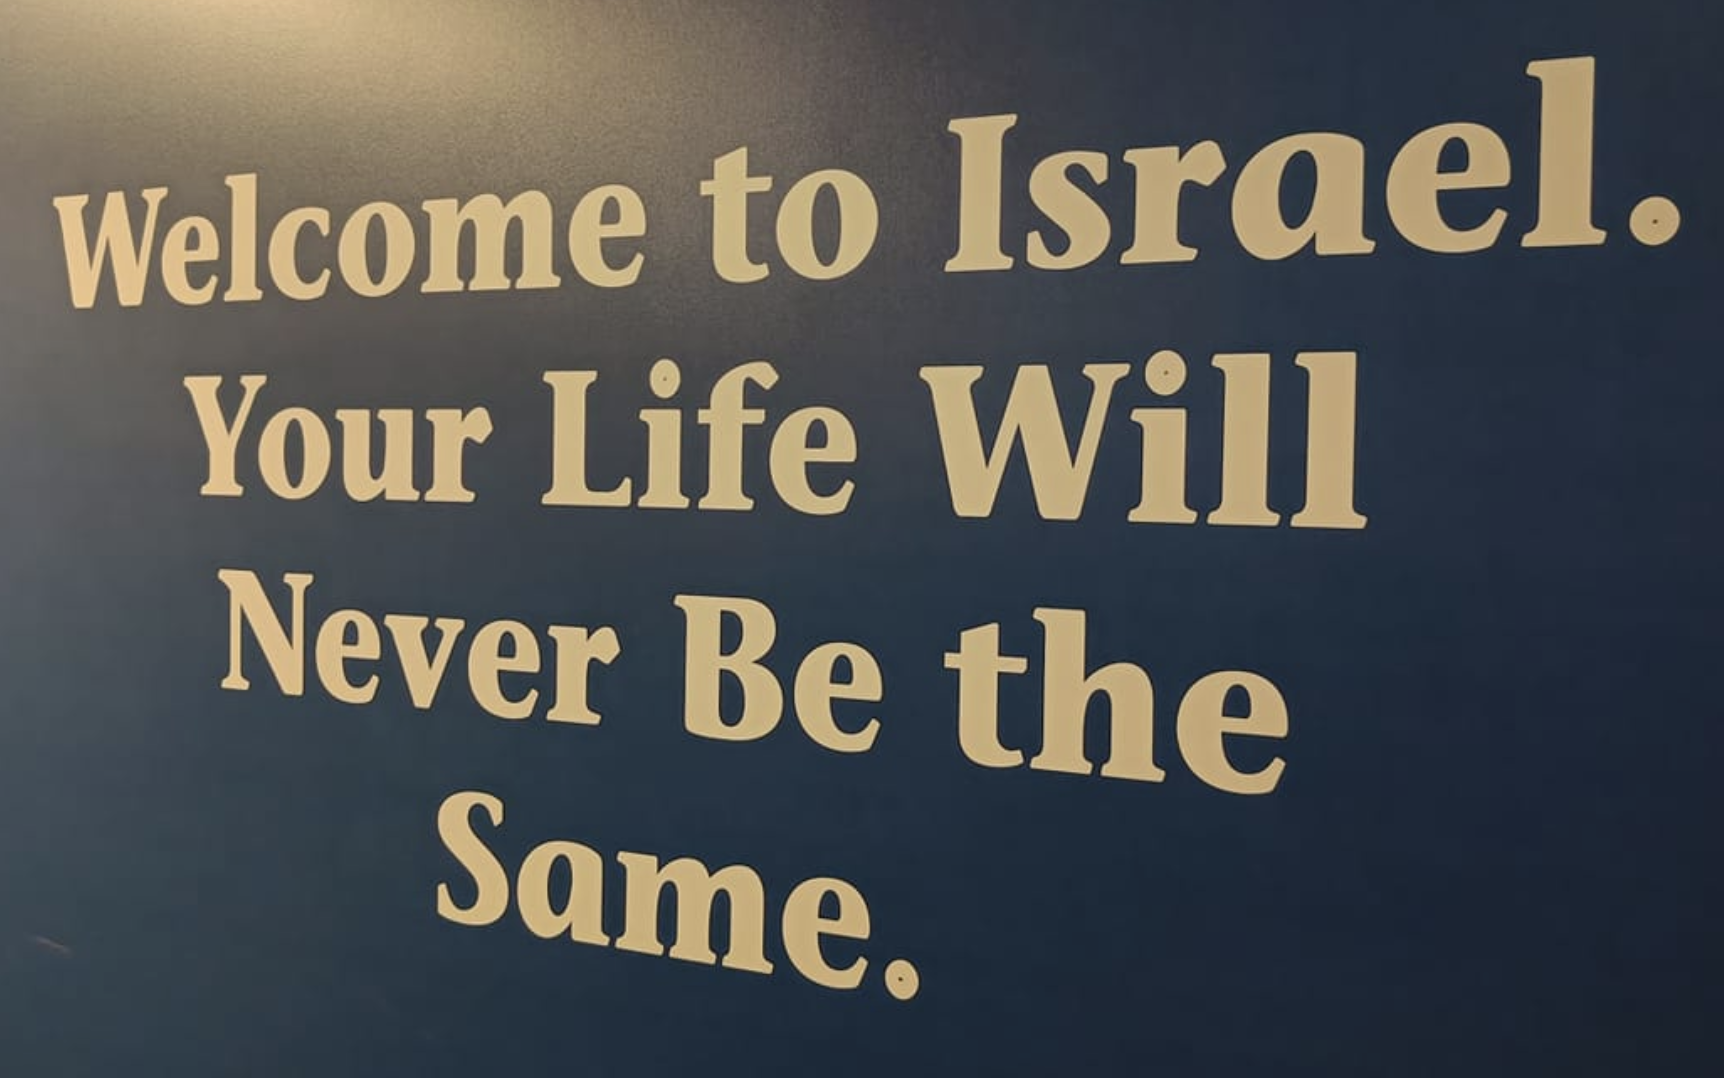 Welcome to Israel. Your life will never be the same.